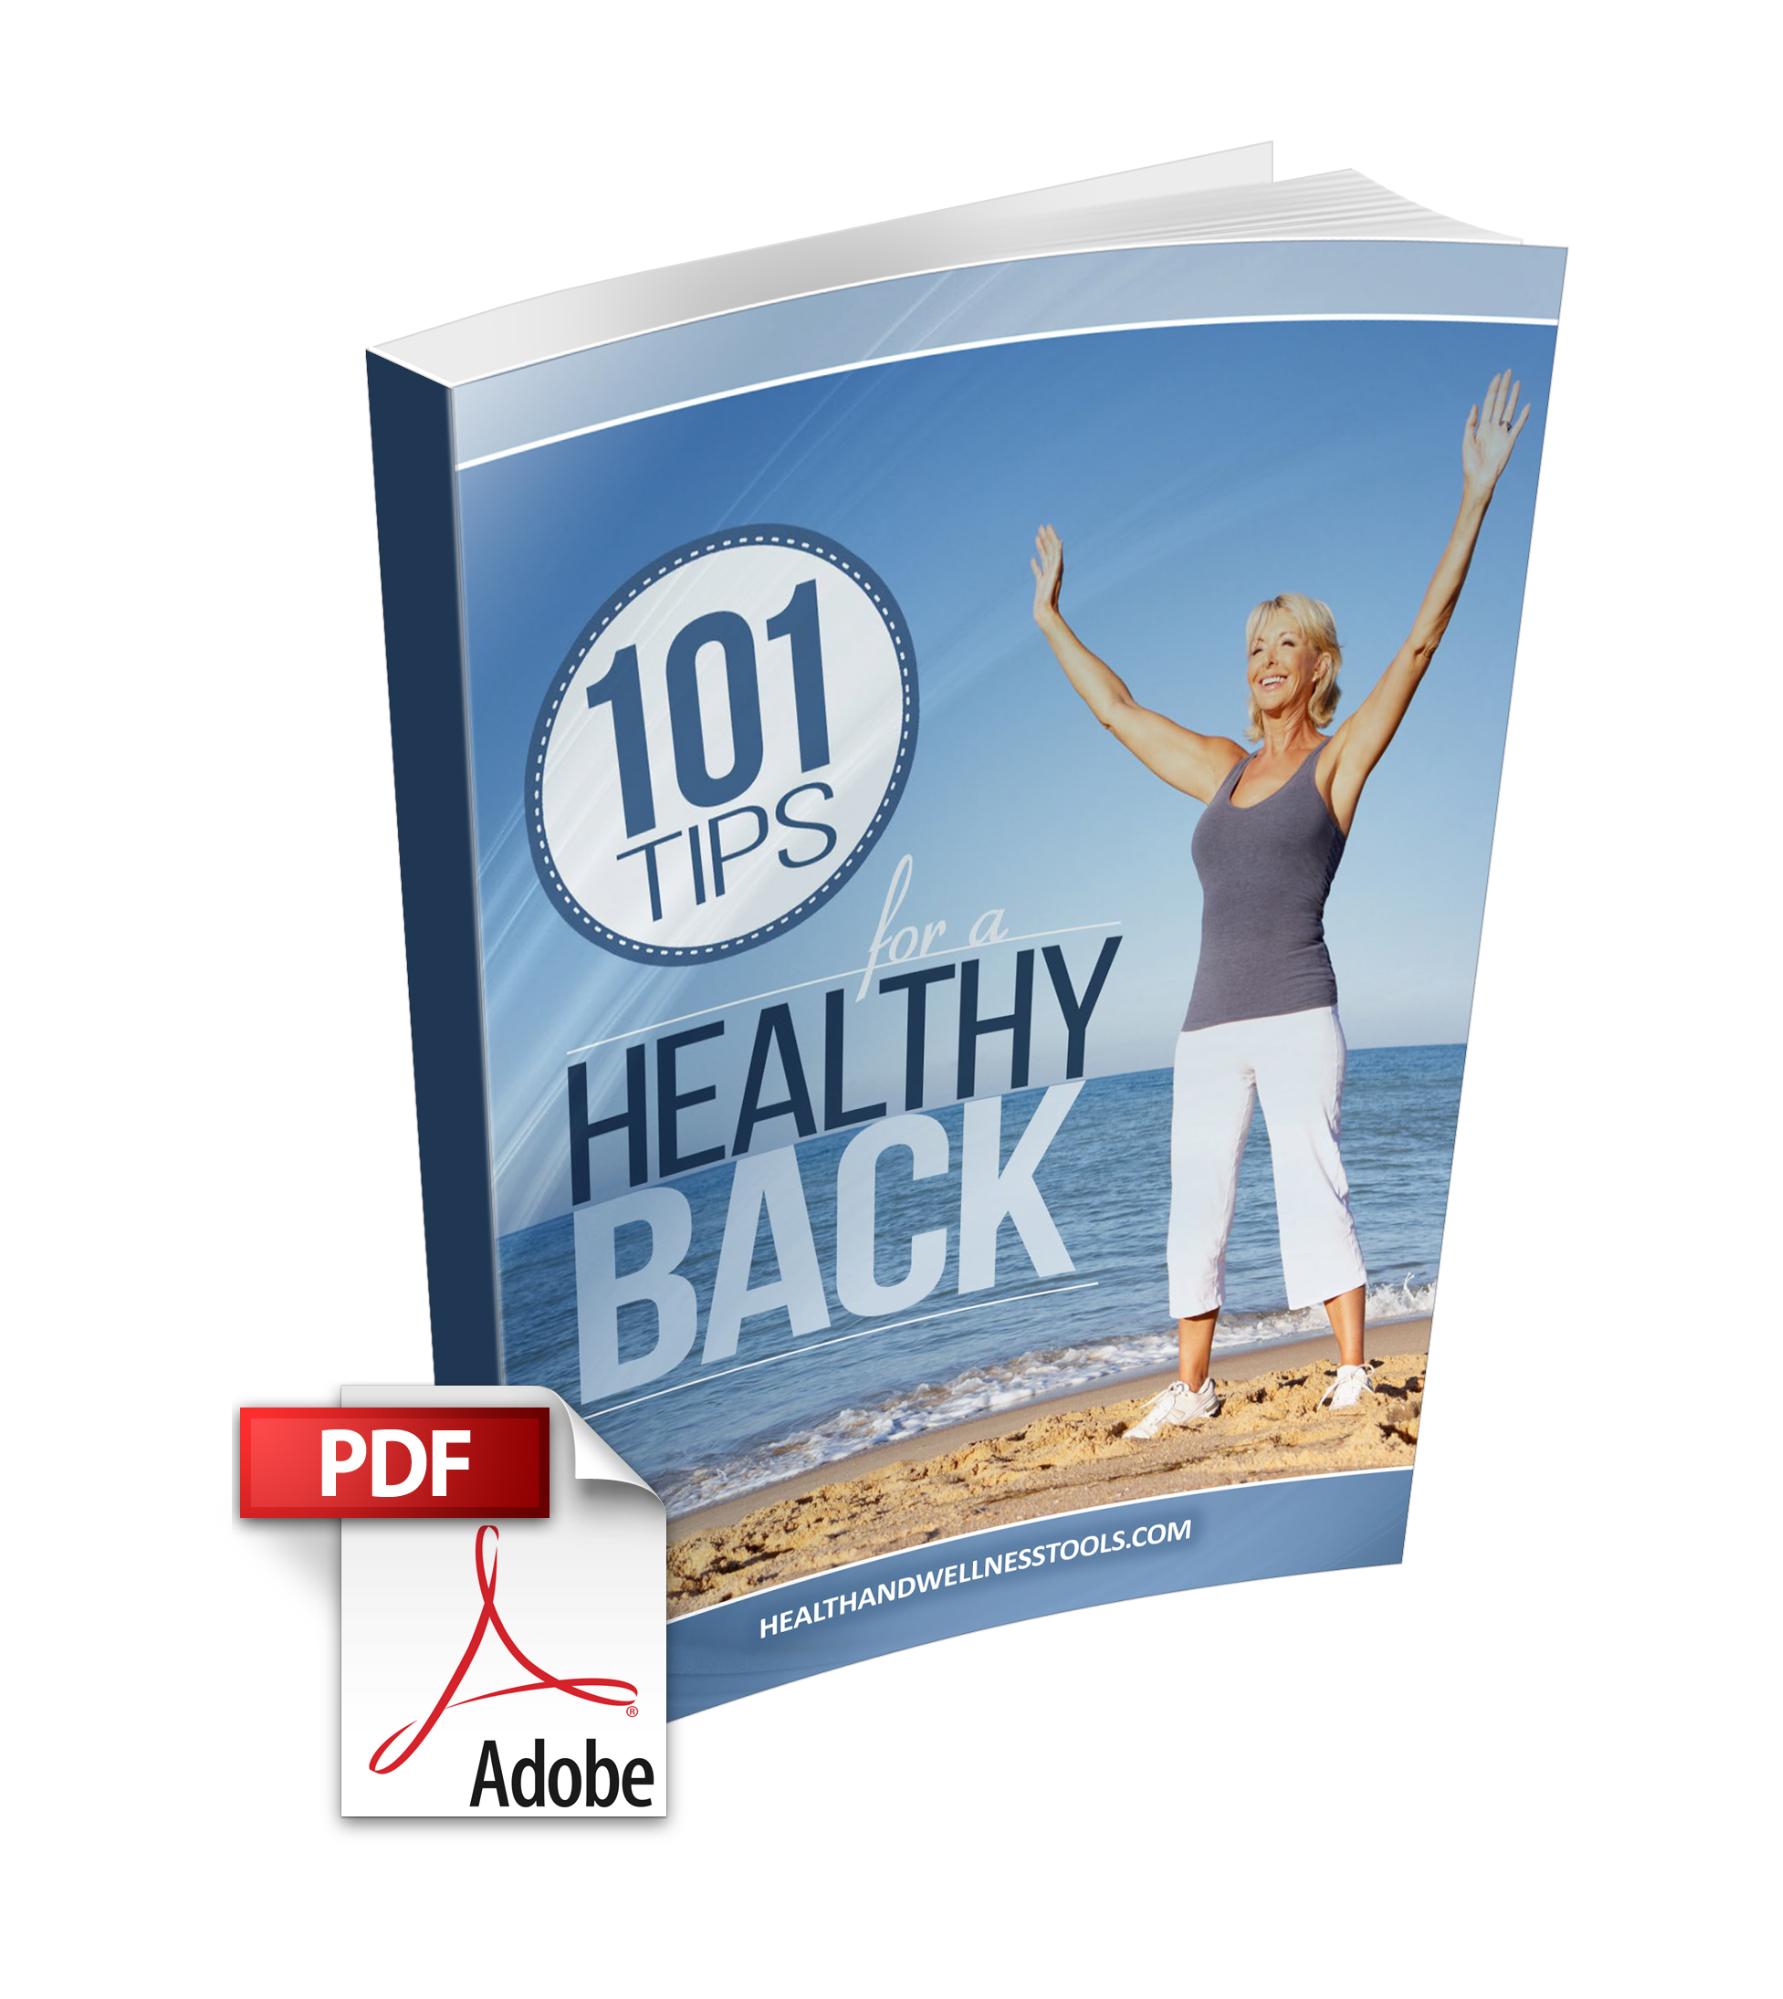 101 Tips for a Healthy Back book with PDF logo